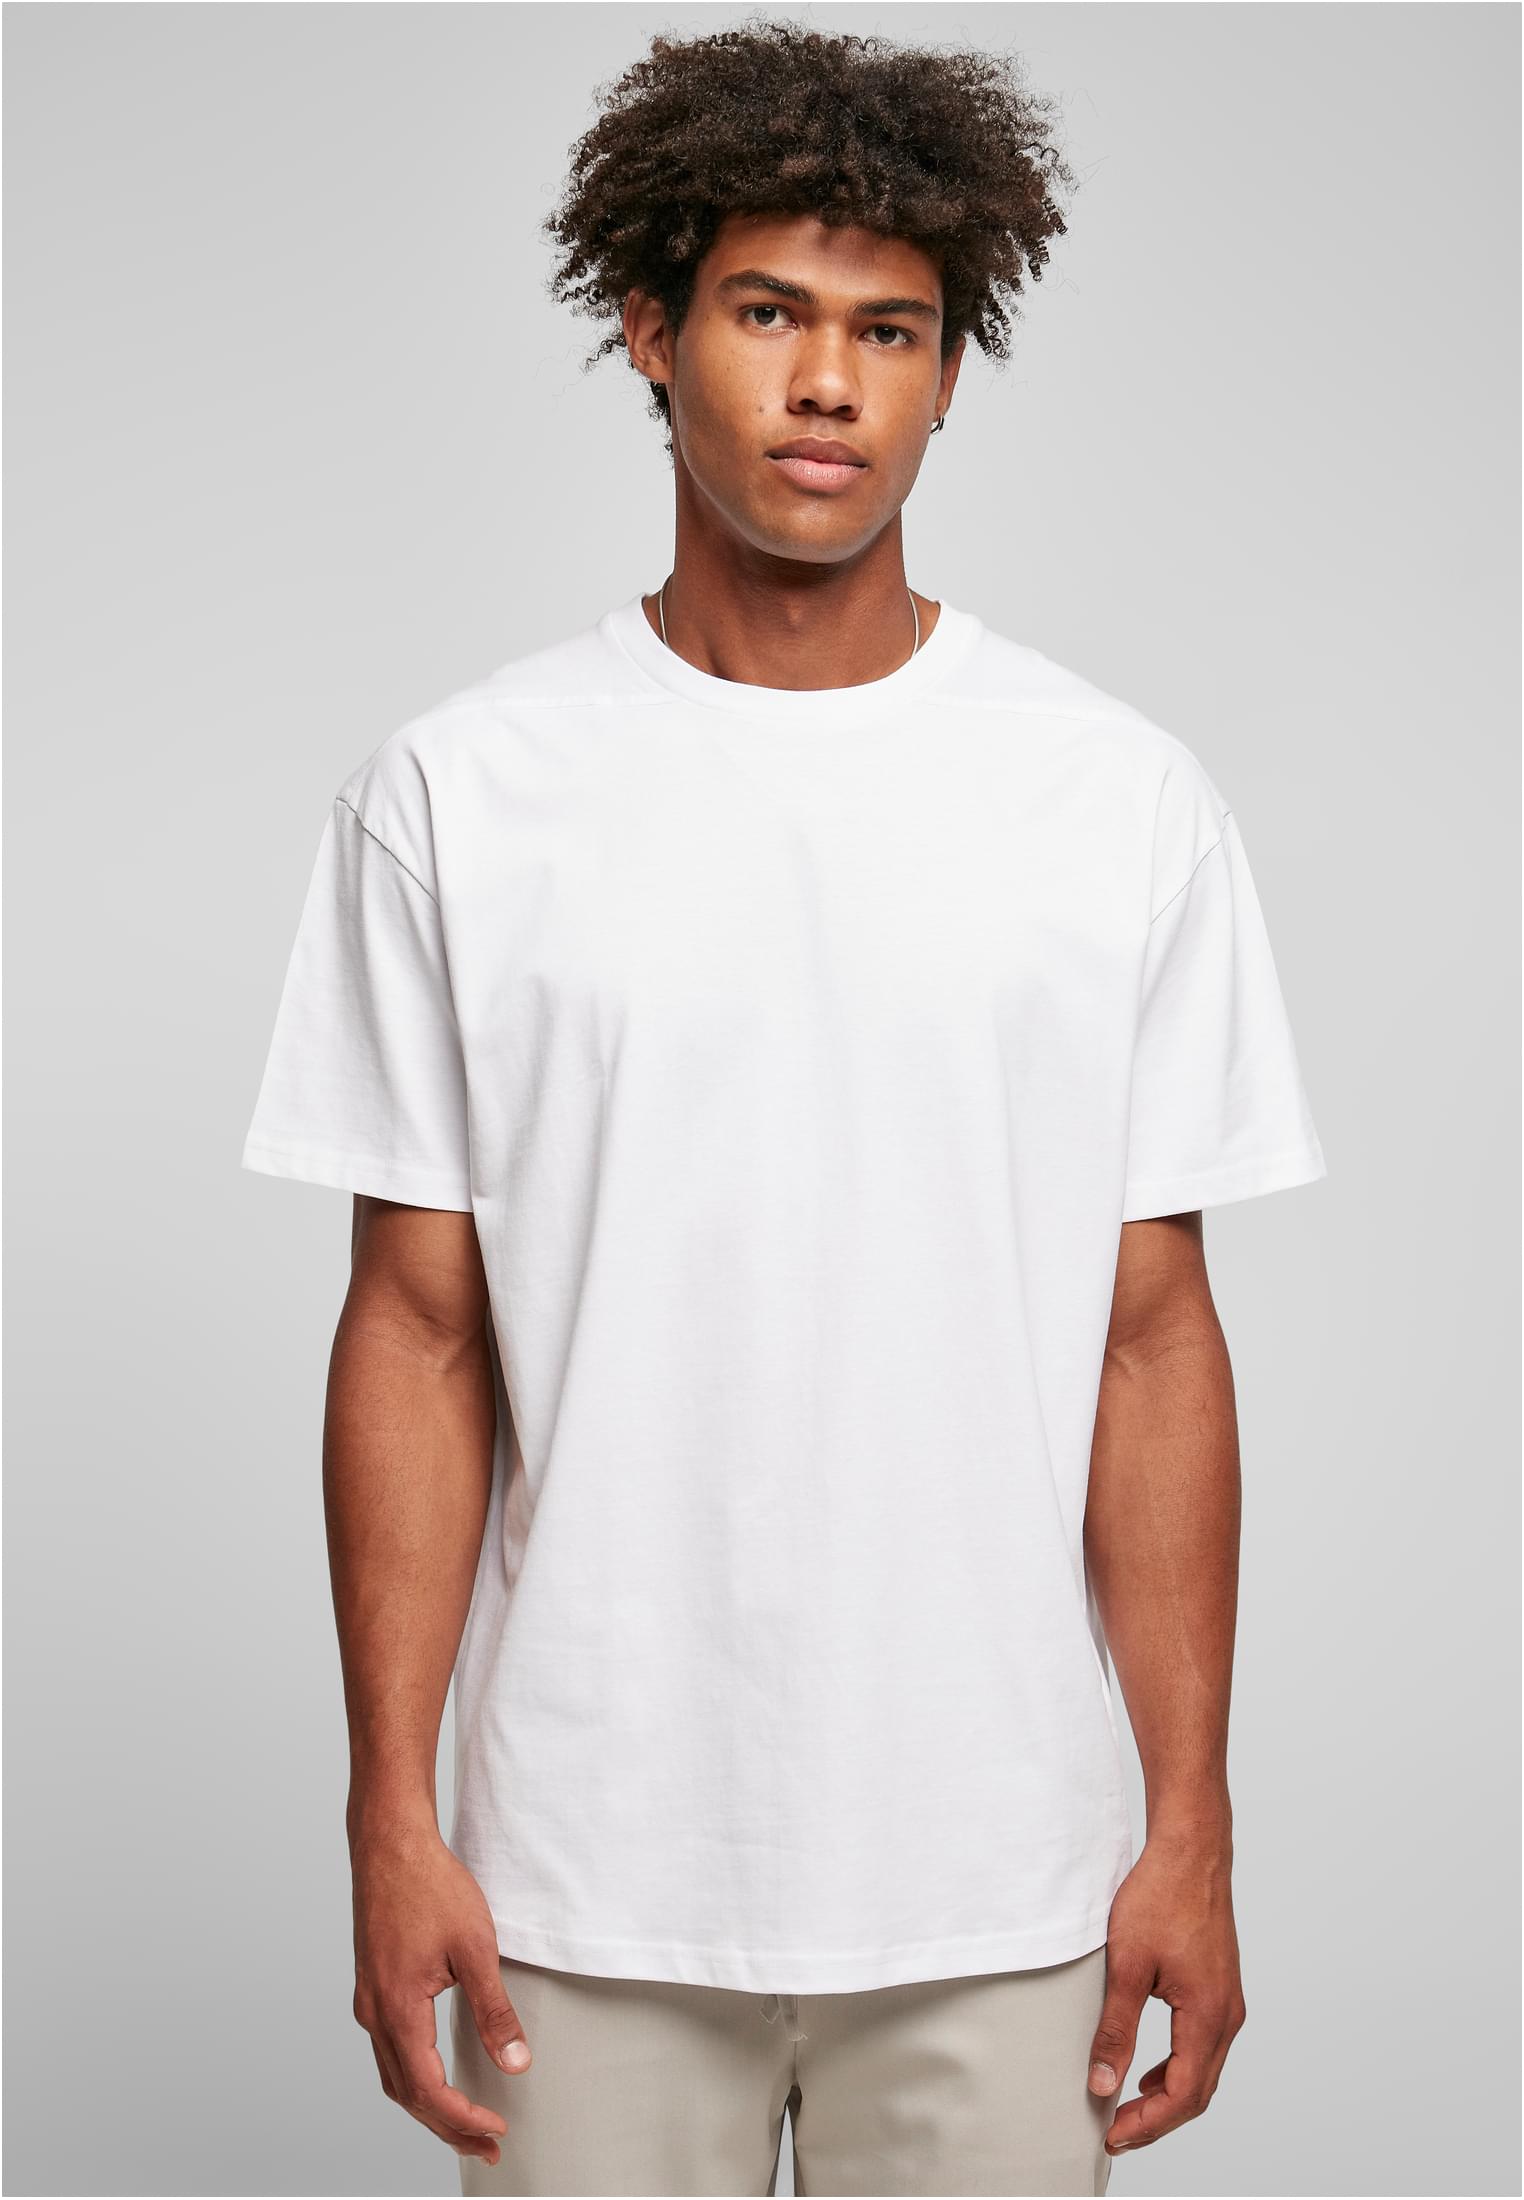 Recycled T-shirt with curved shoulder white